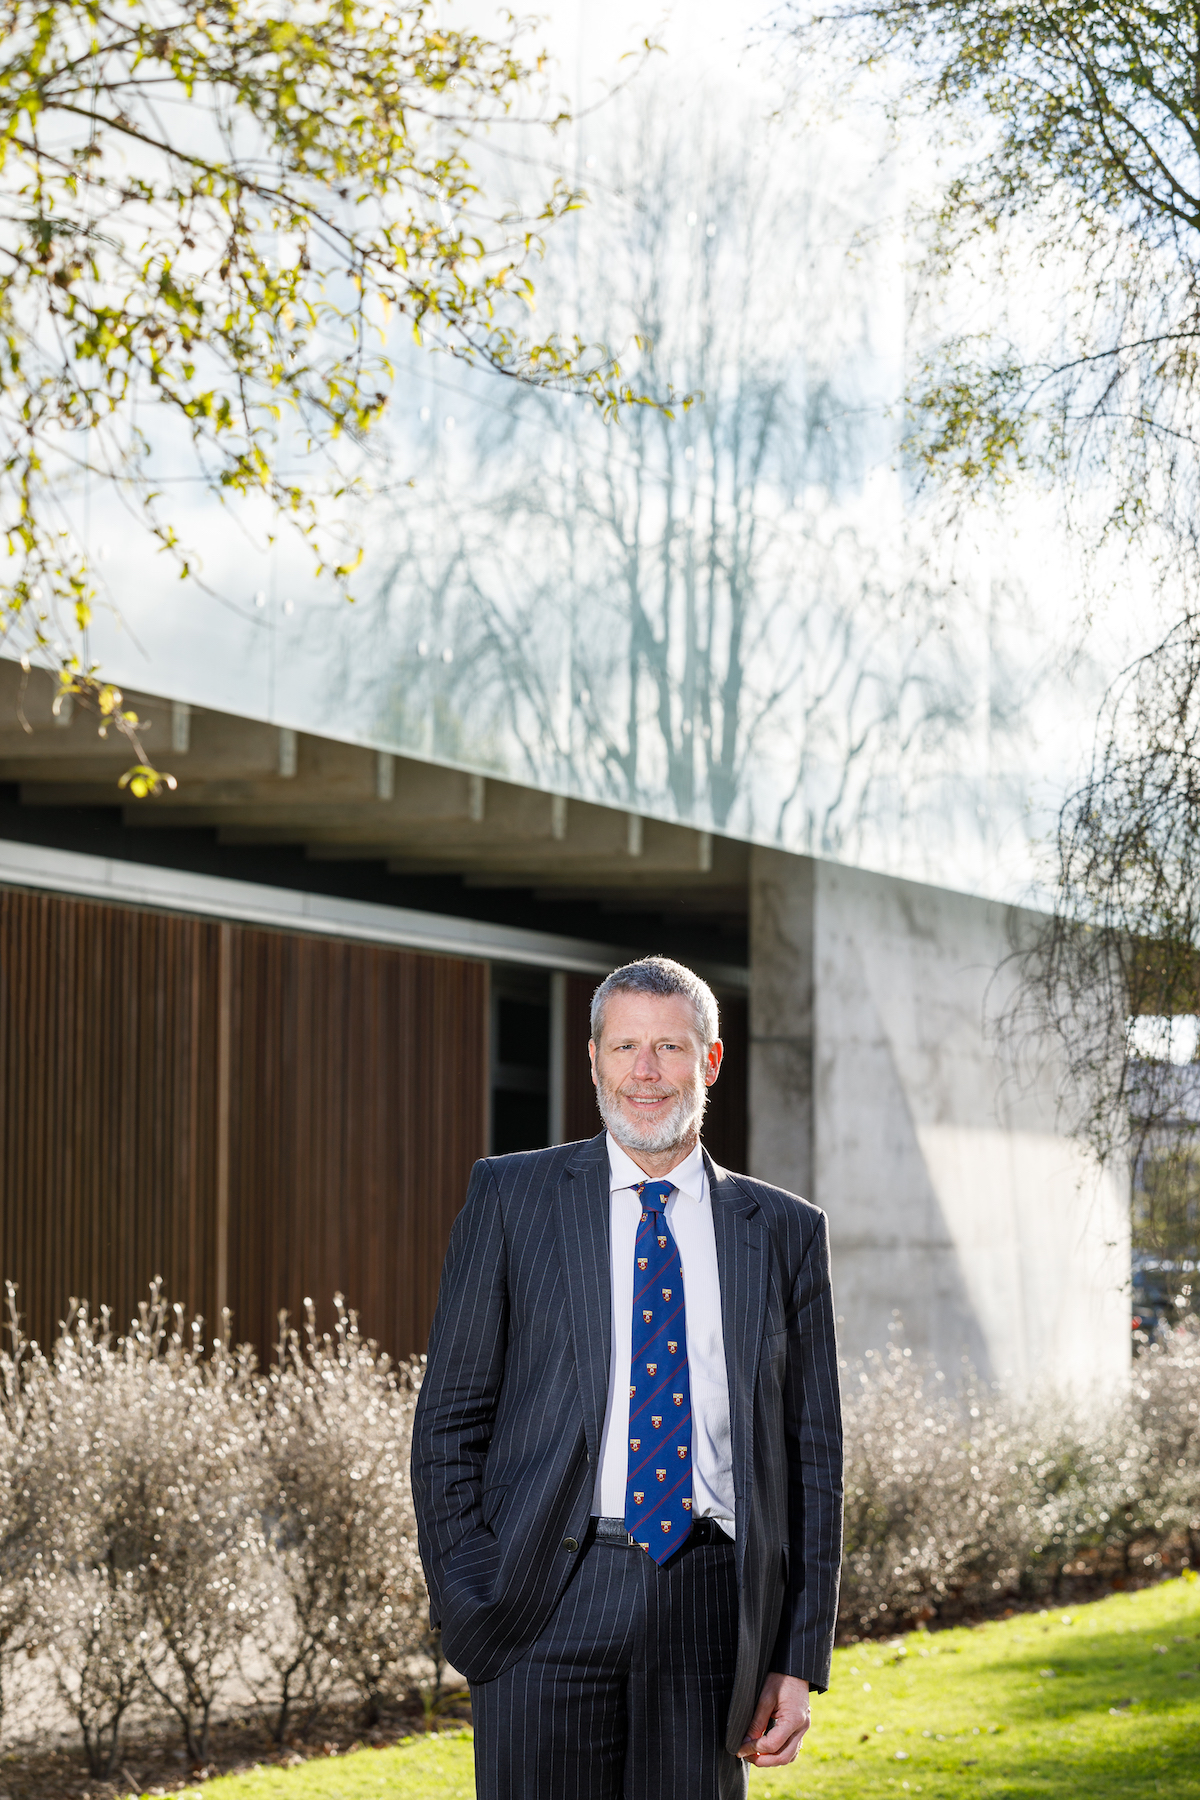 Rod Carr, Vice-Chancellor of University of Canterbury, New Zealand